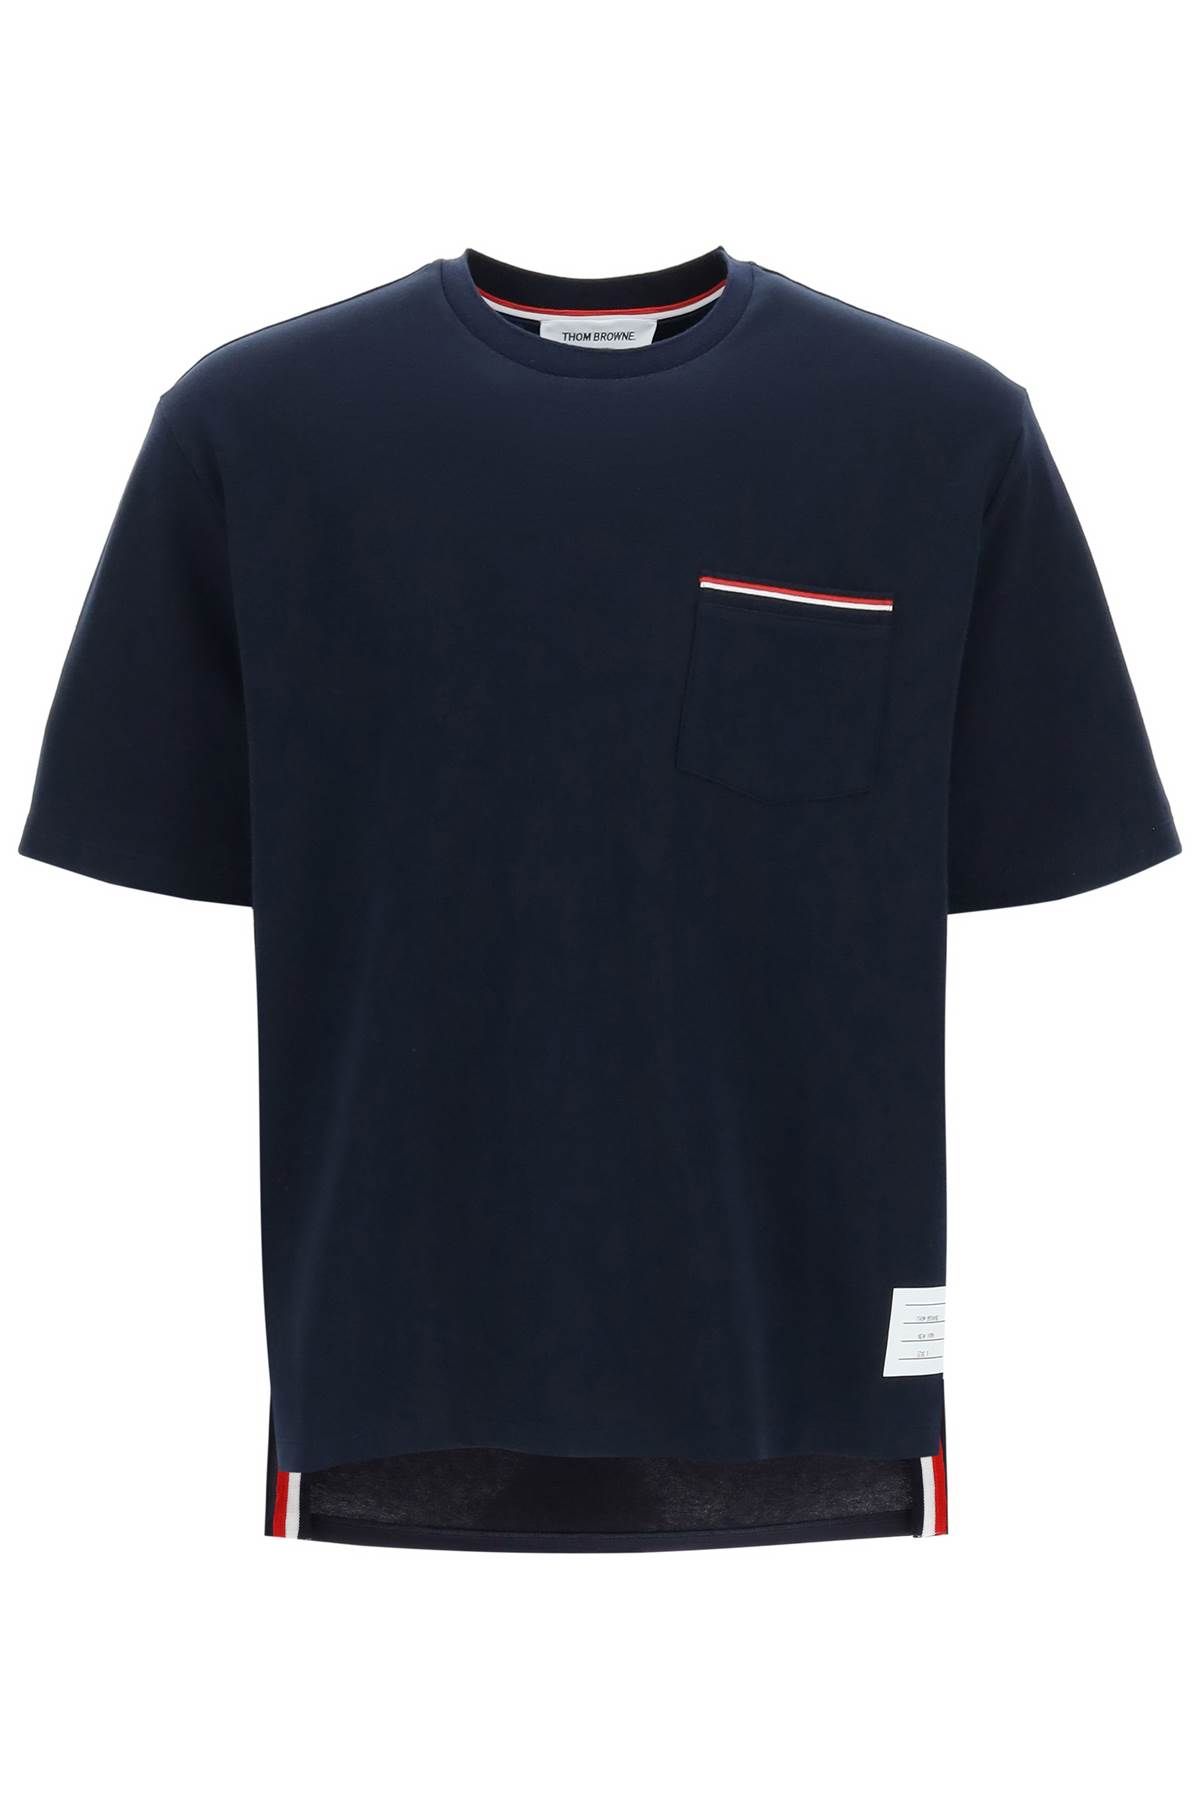 Thom Browne THOM BROWNE oversized t-shirt with